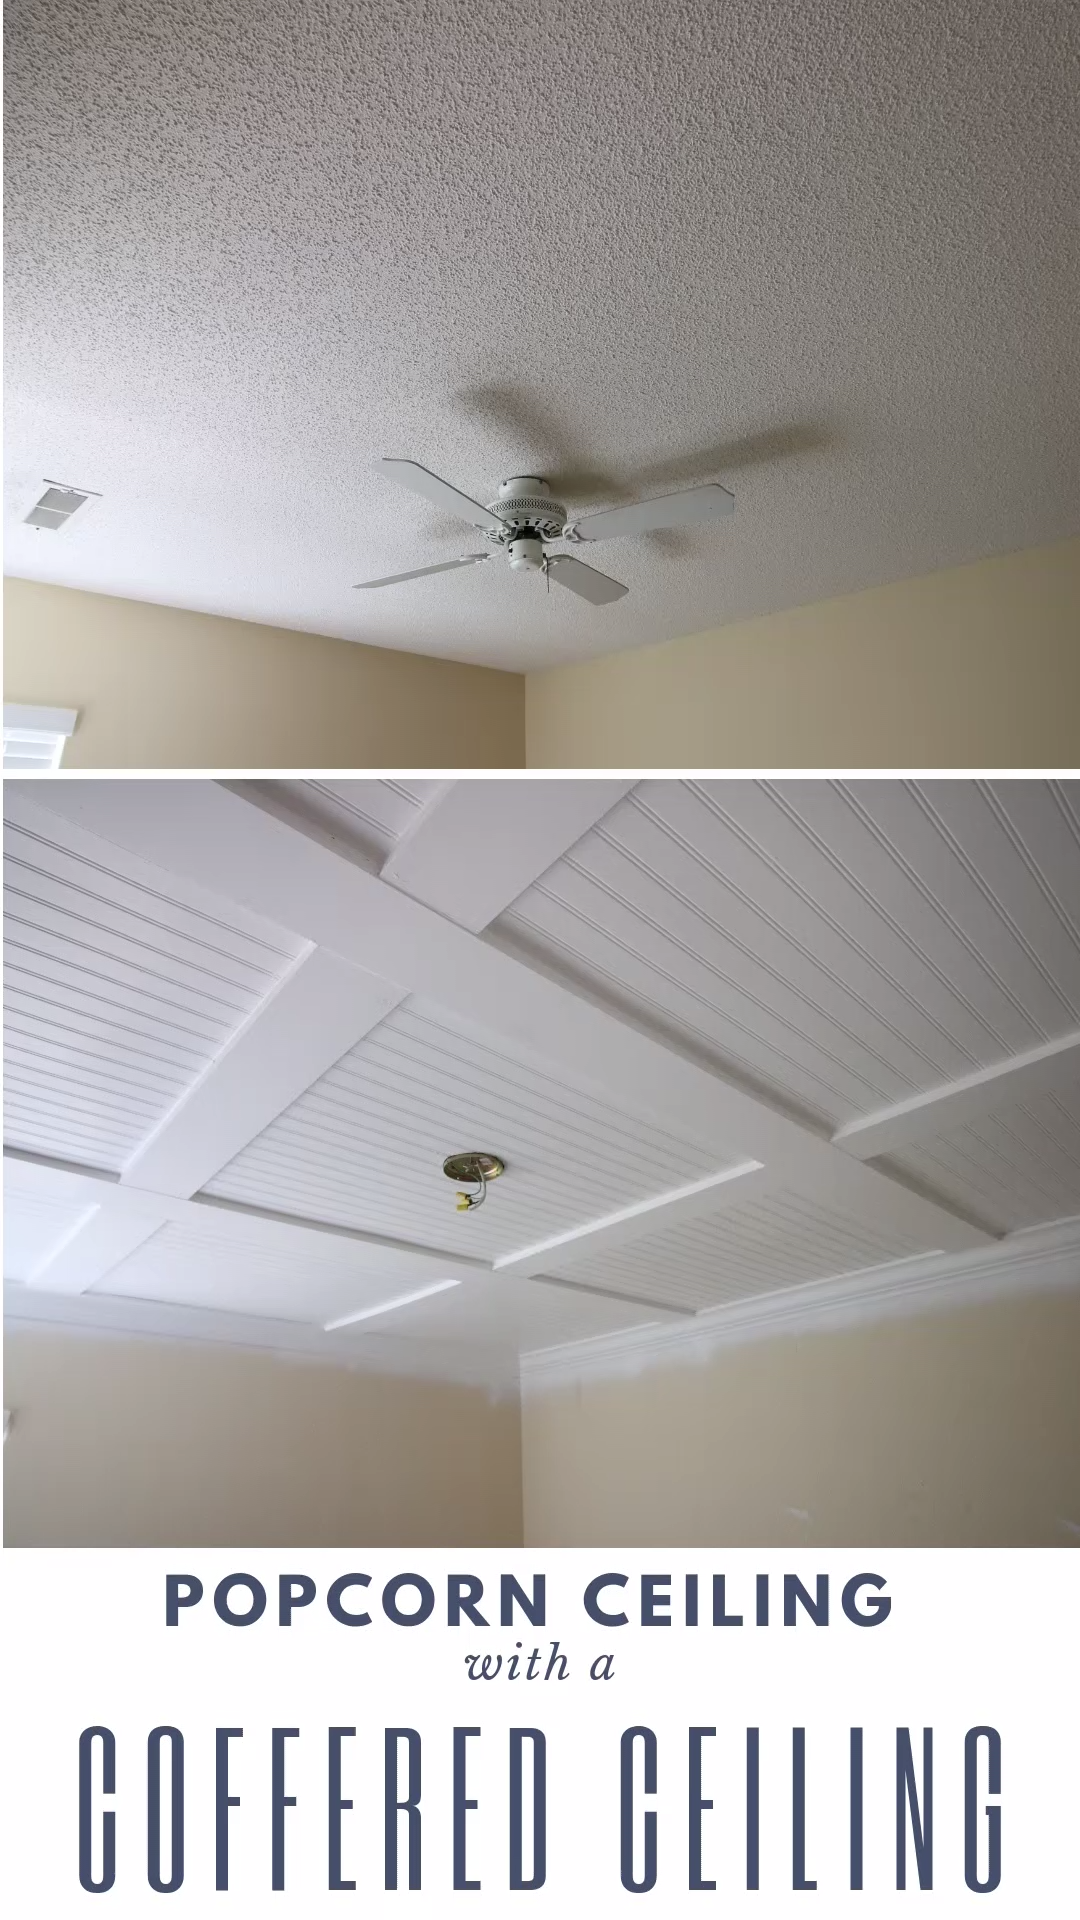 Cover a popcorn ceiling with a coffered ceiling - Cover a popcorn ceiling with a coffered ceiling -   12 diy Room renovation ideas